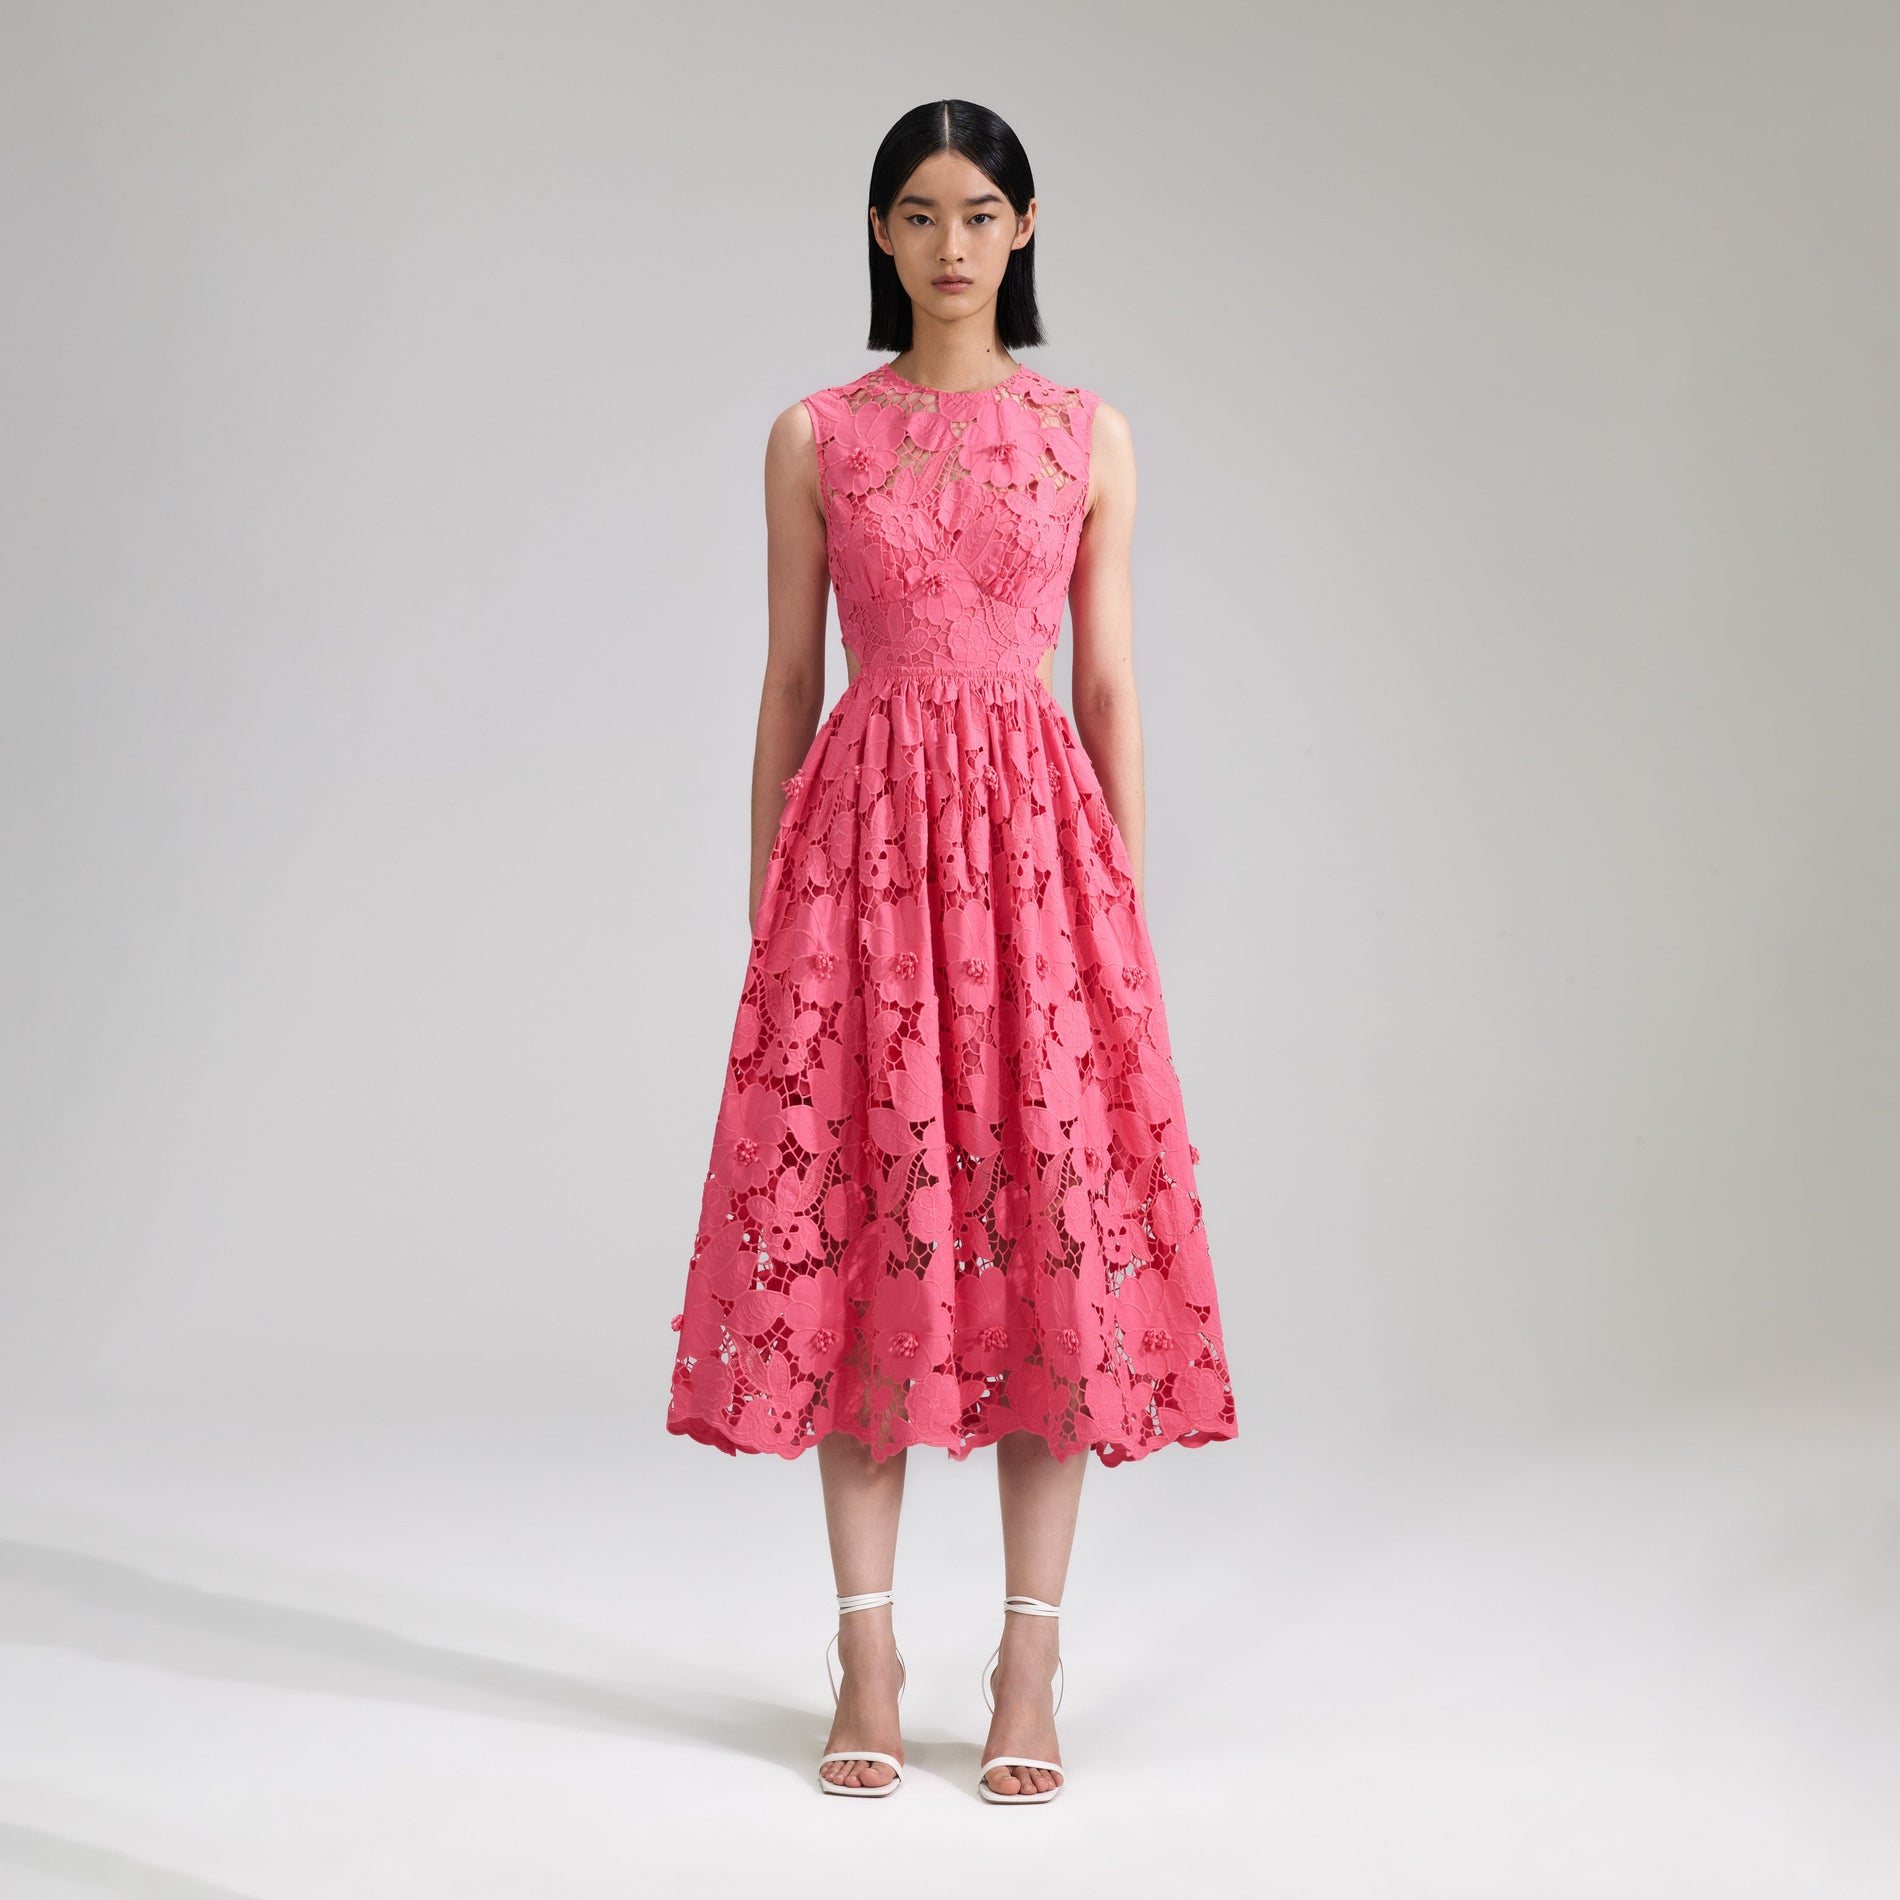 Pink Lace Dress - Have Need Want